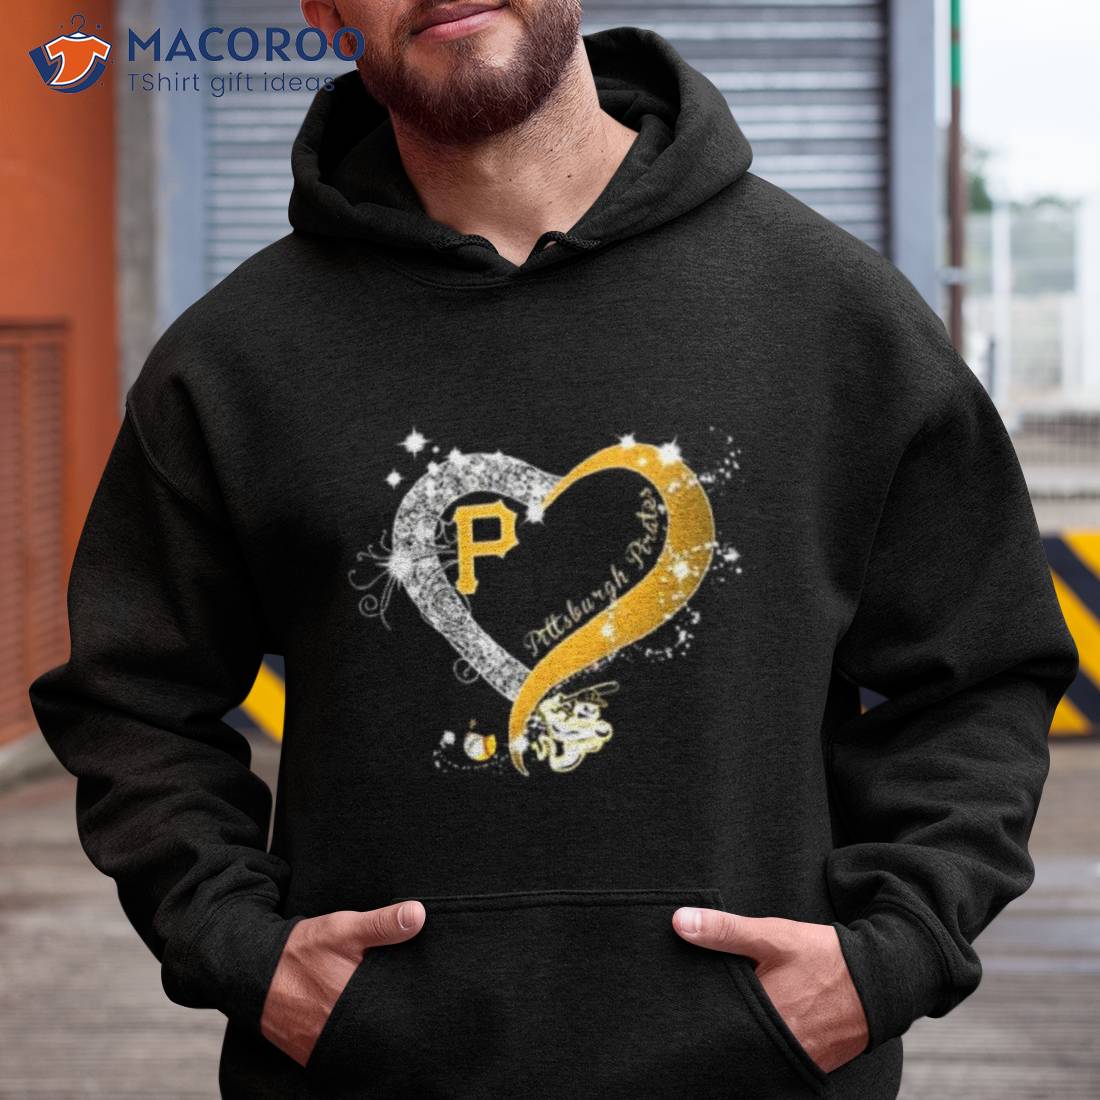 We are famalee Pittsburgh pirates baseball shirt, hoodie, sweater, long  sleeve and tank top